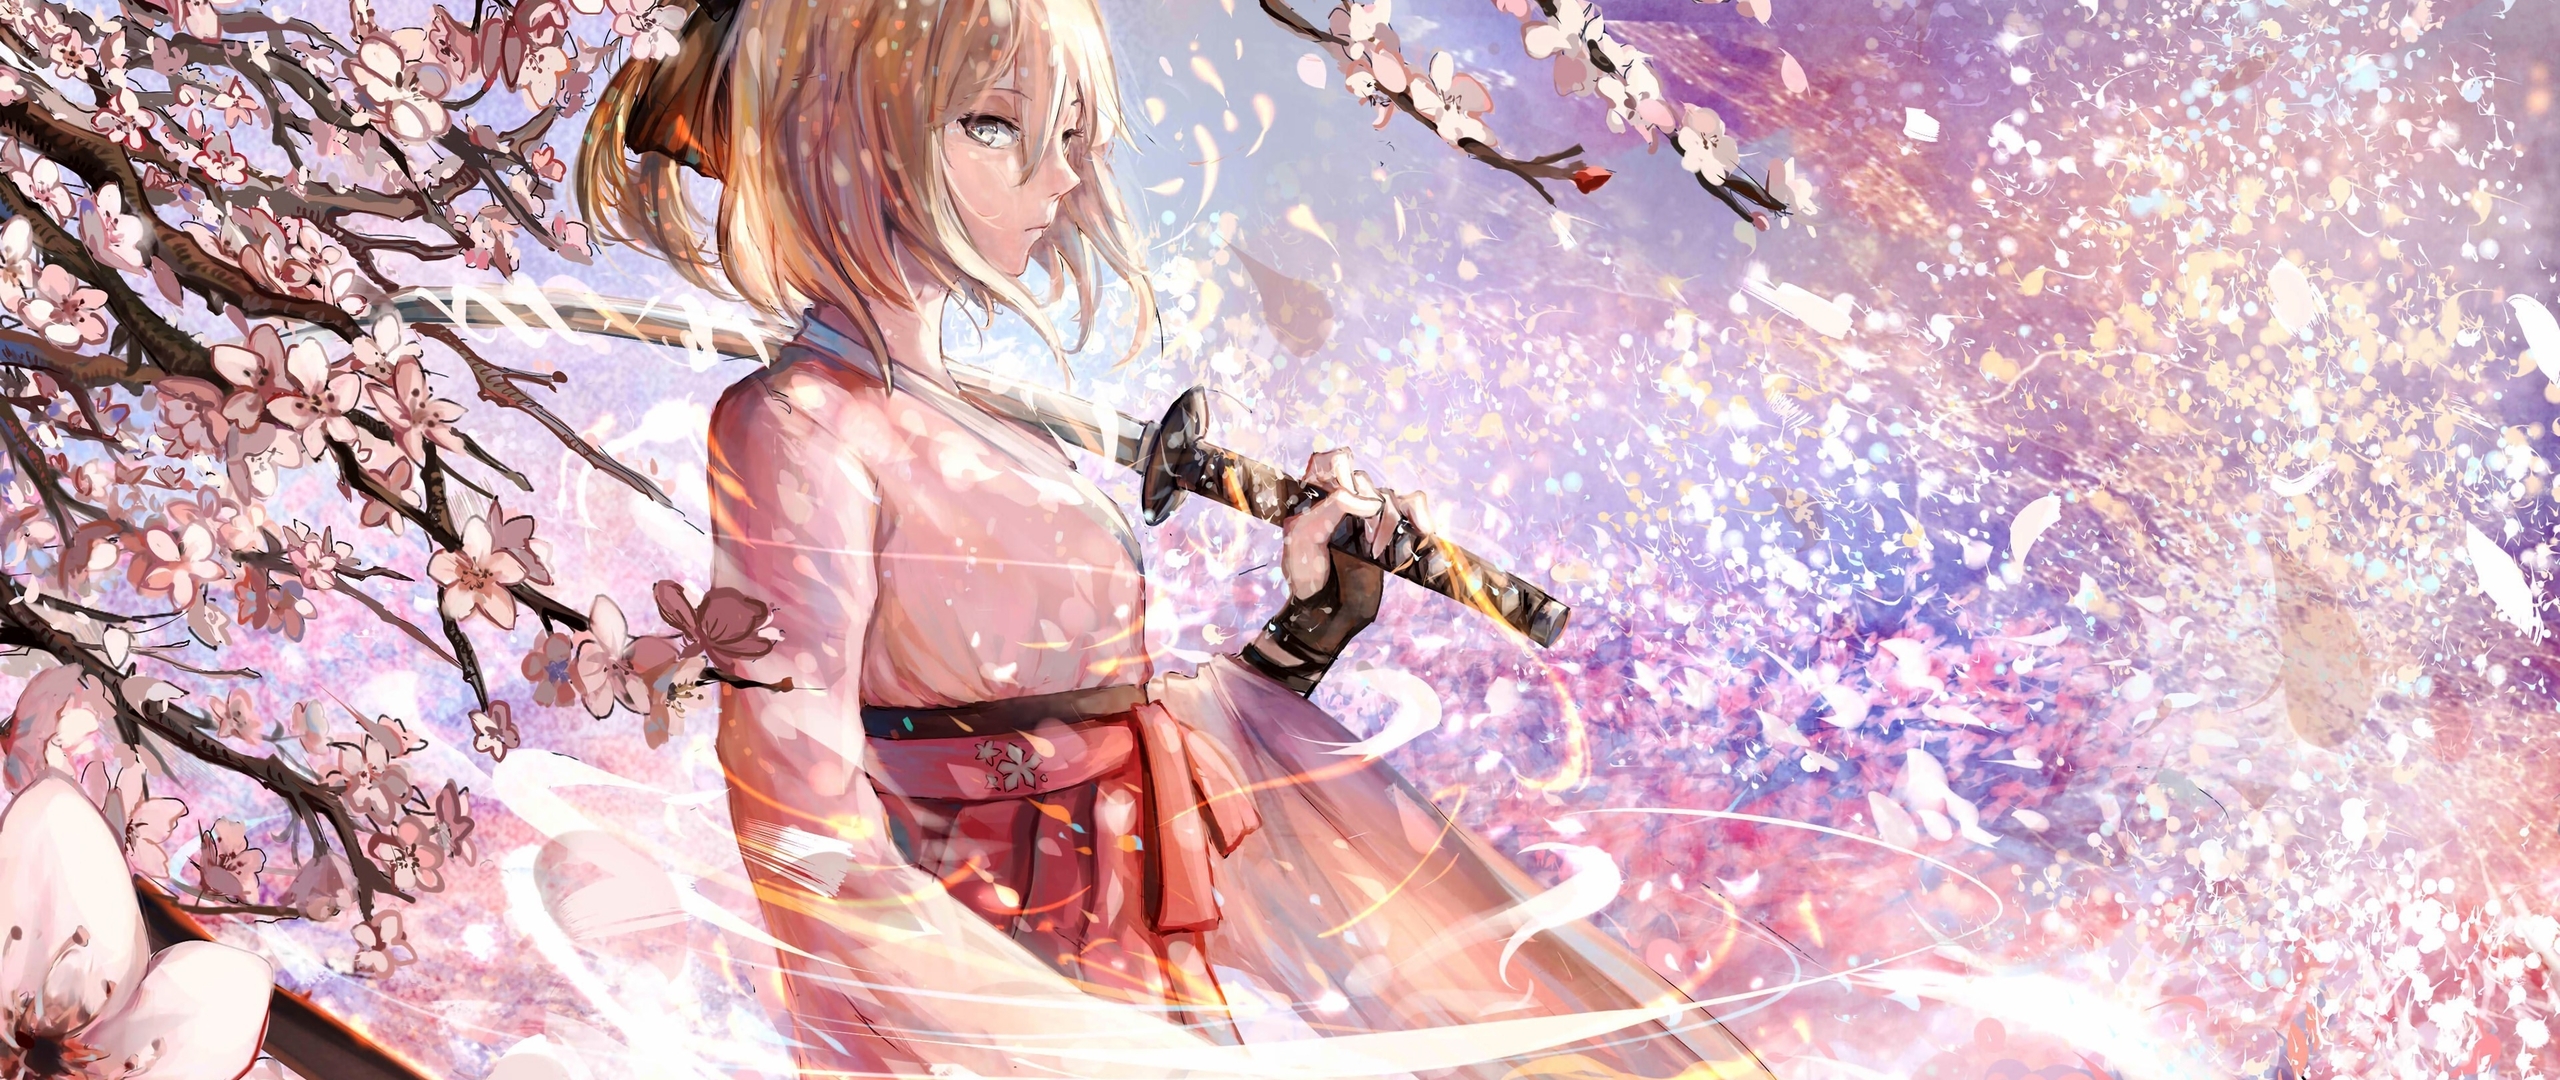 2560x1080 Fate Grand Order Anime Girl With Sword 4k 2560x1080